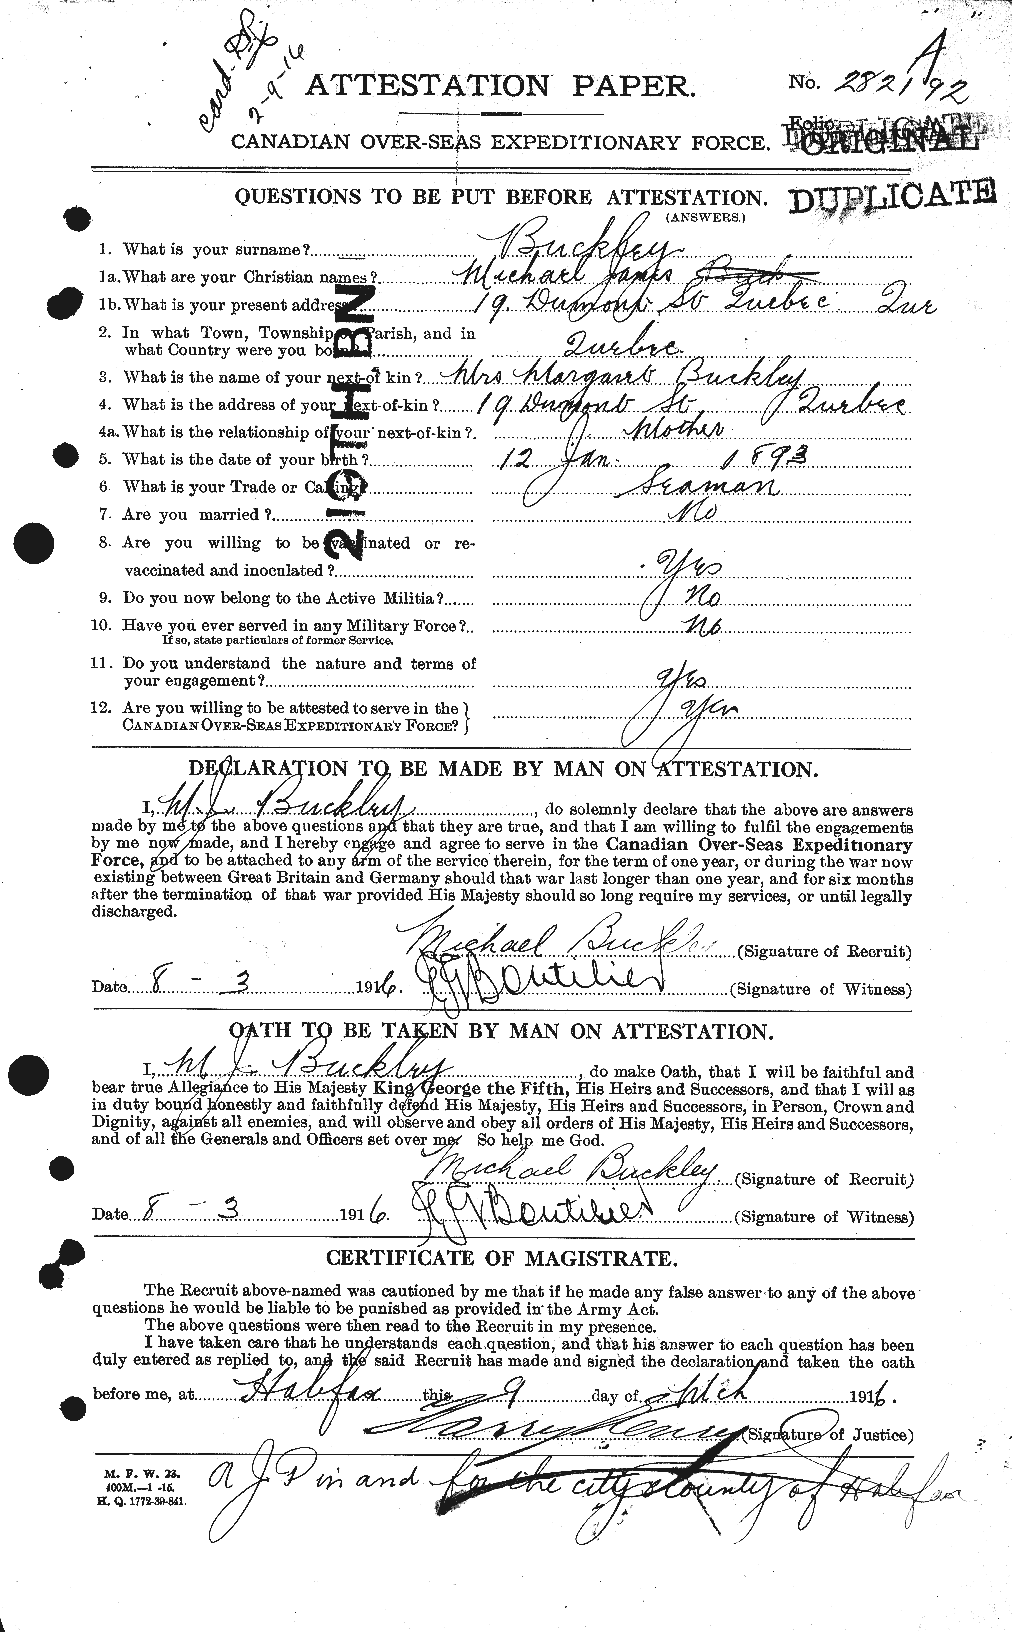 Personnel Records of the First World War - CEF 271160a